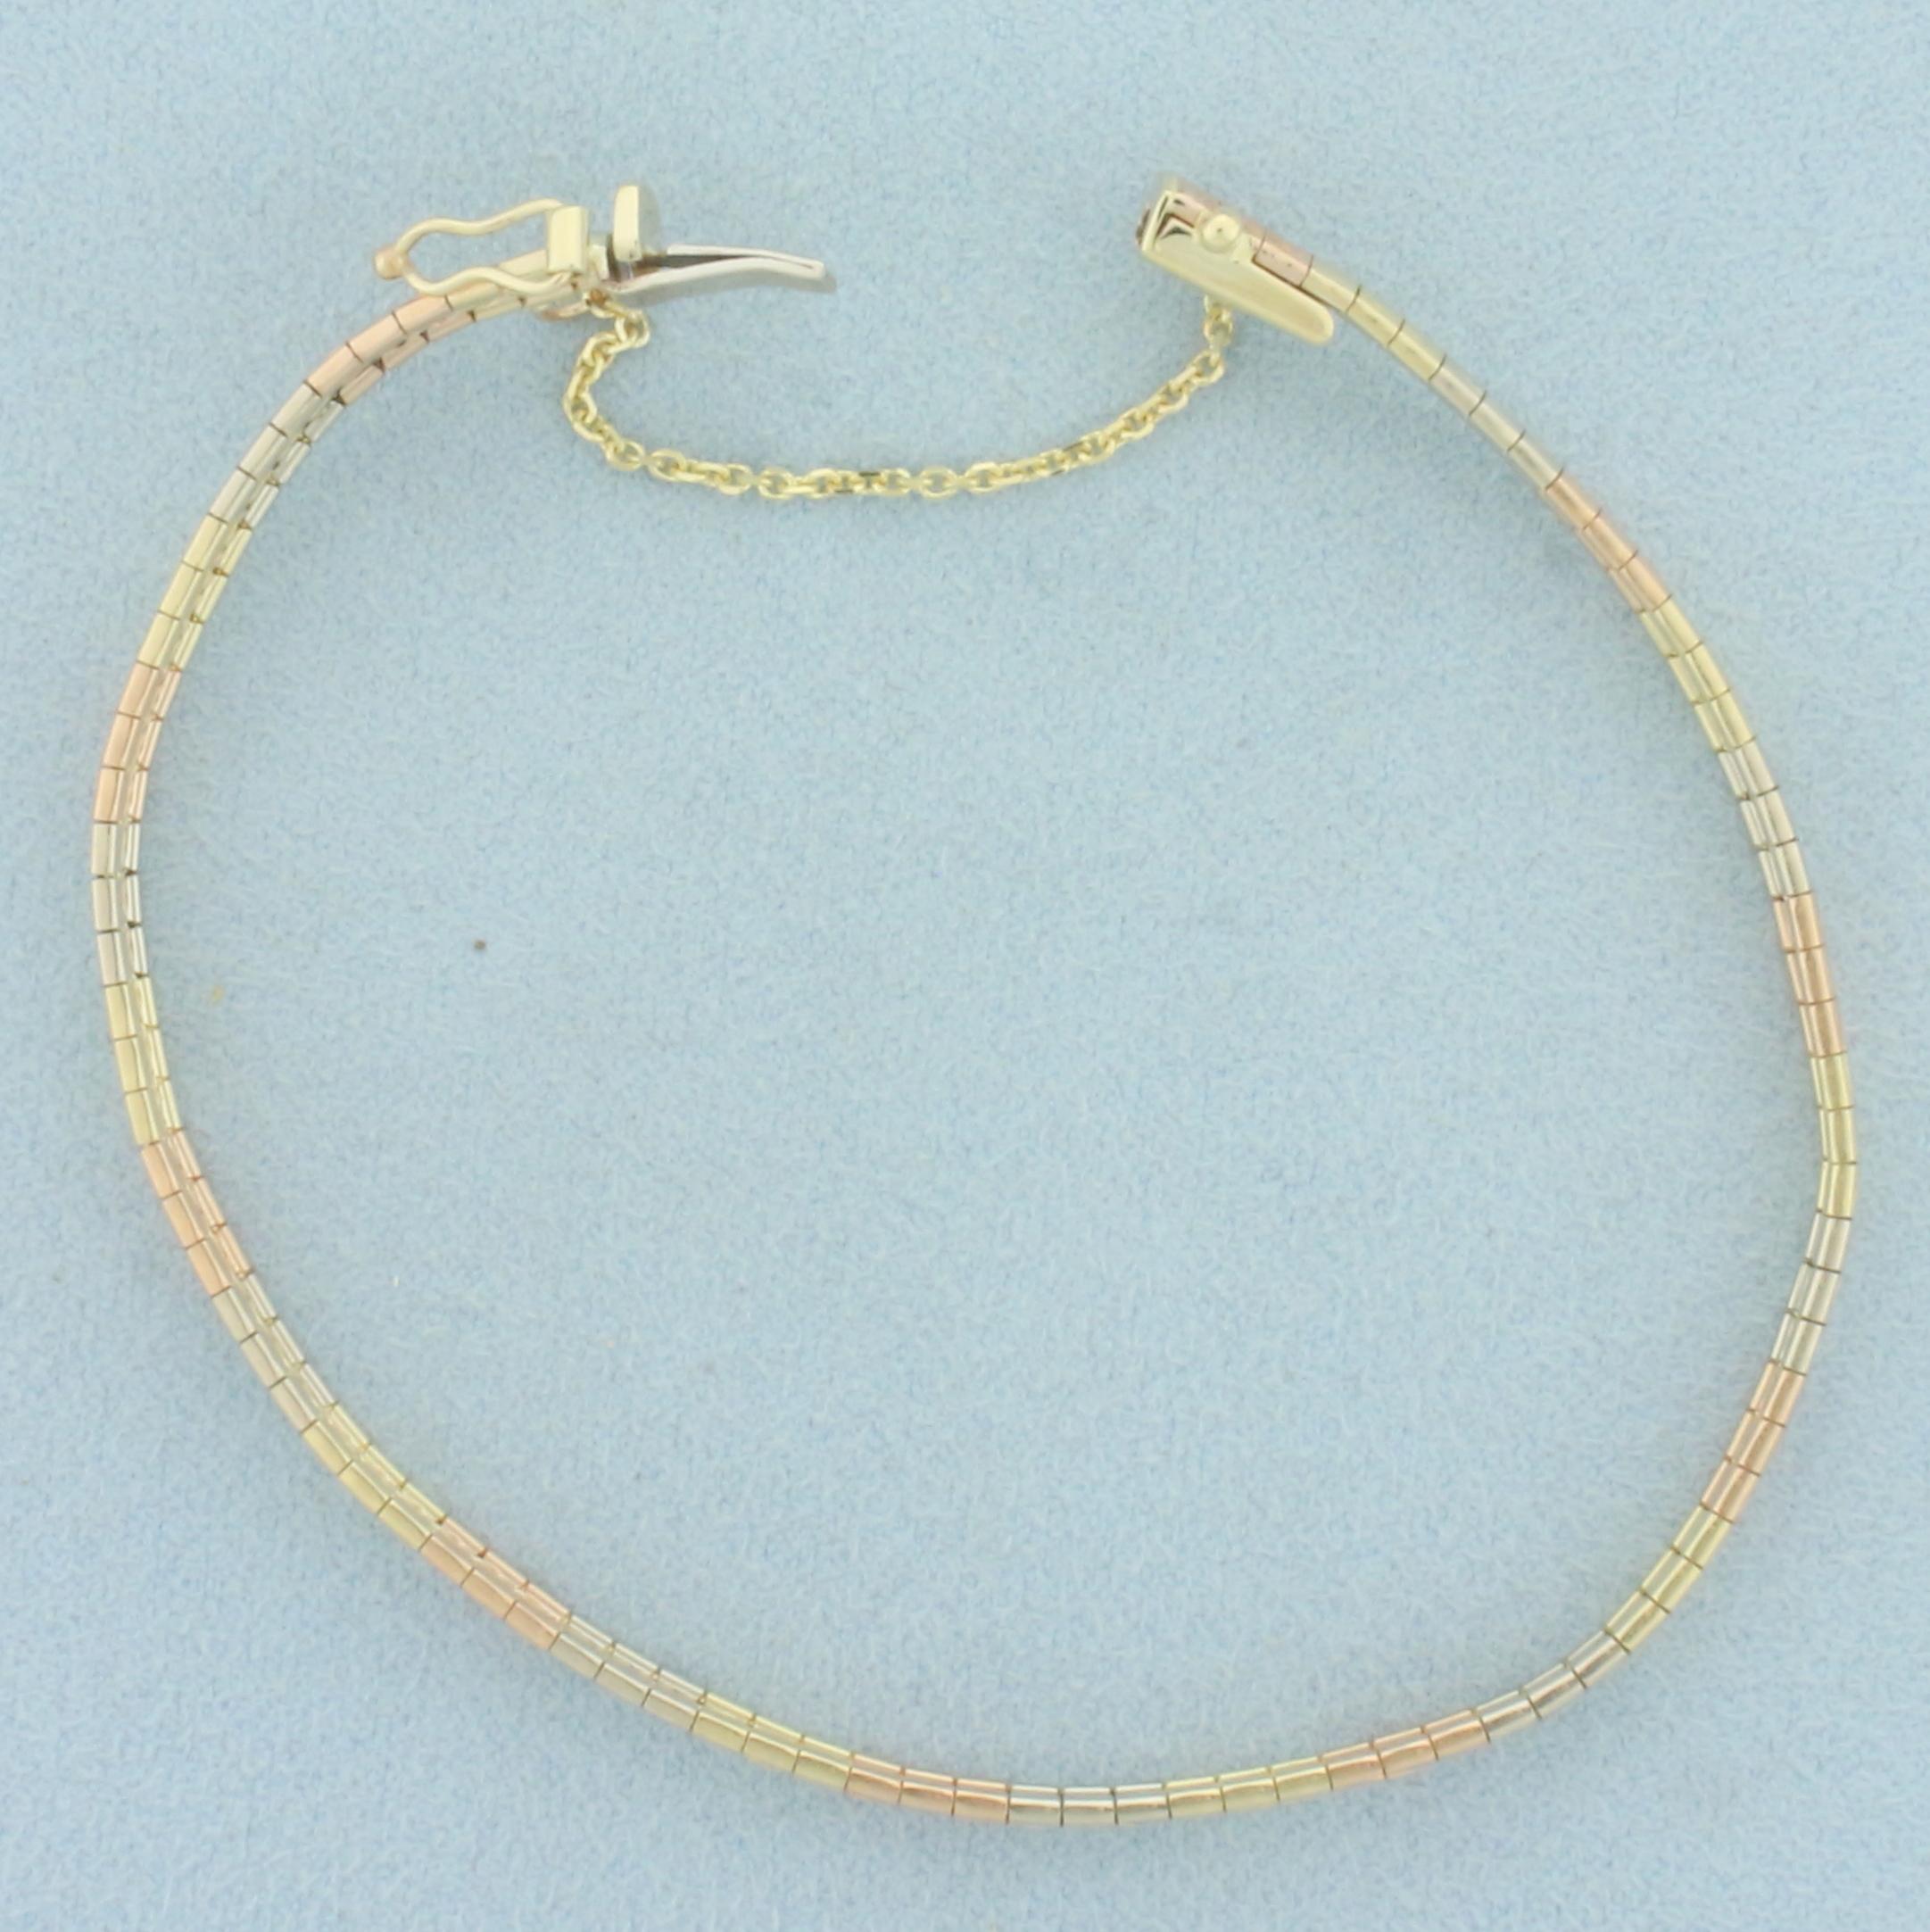 Tri Color Etched Design Omega Bracelet In 14k Yellow, White, And Rose Gold